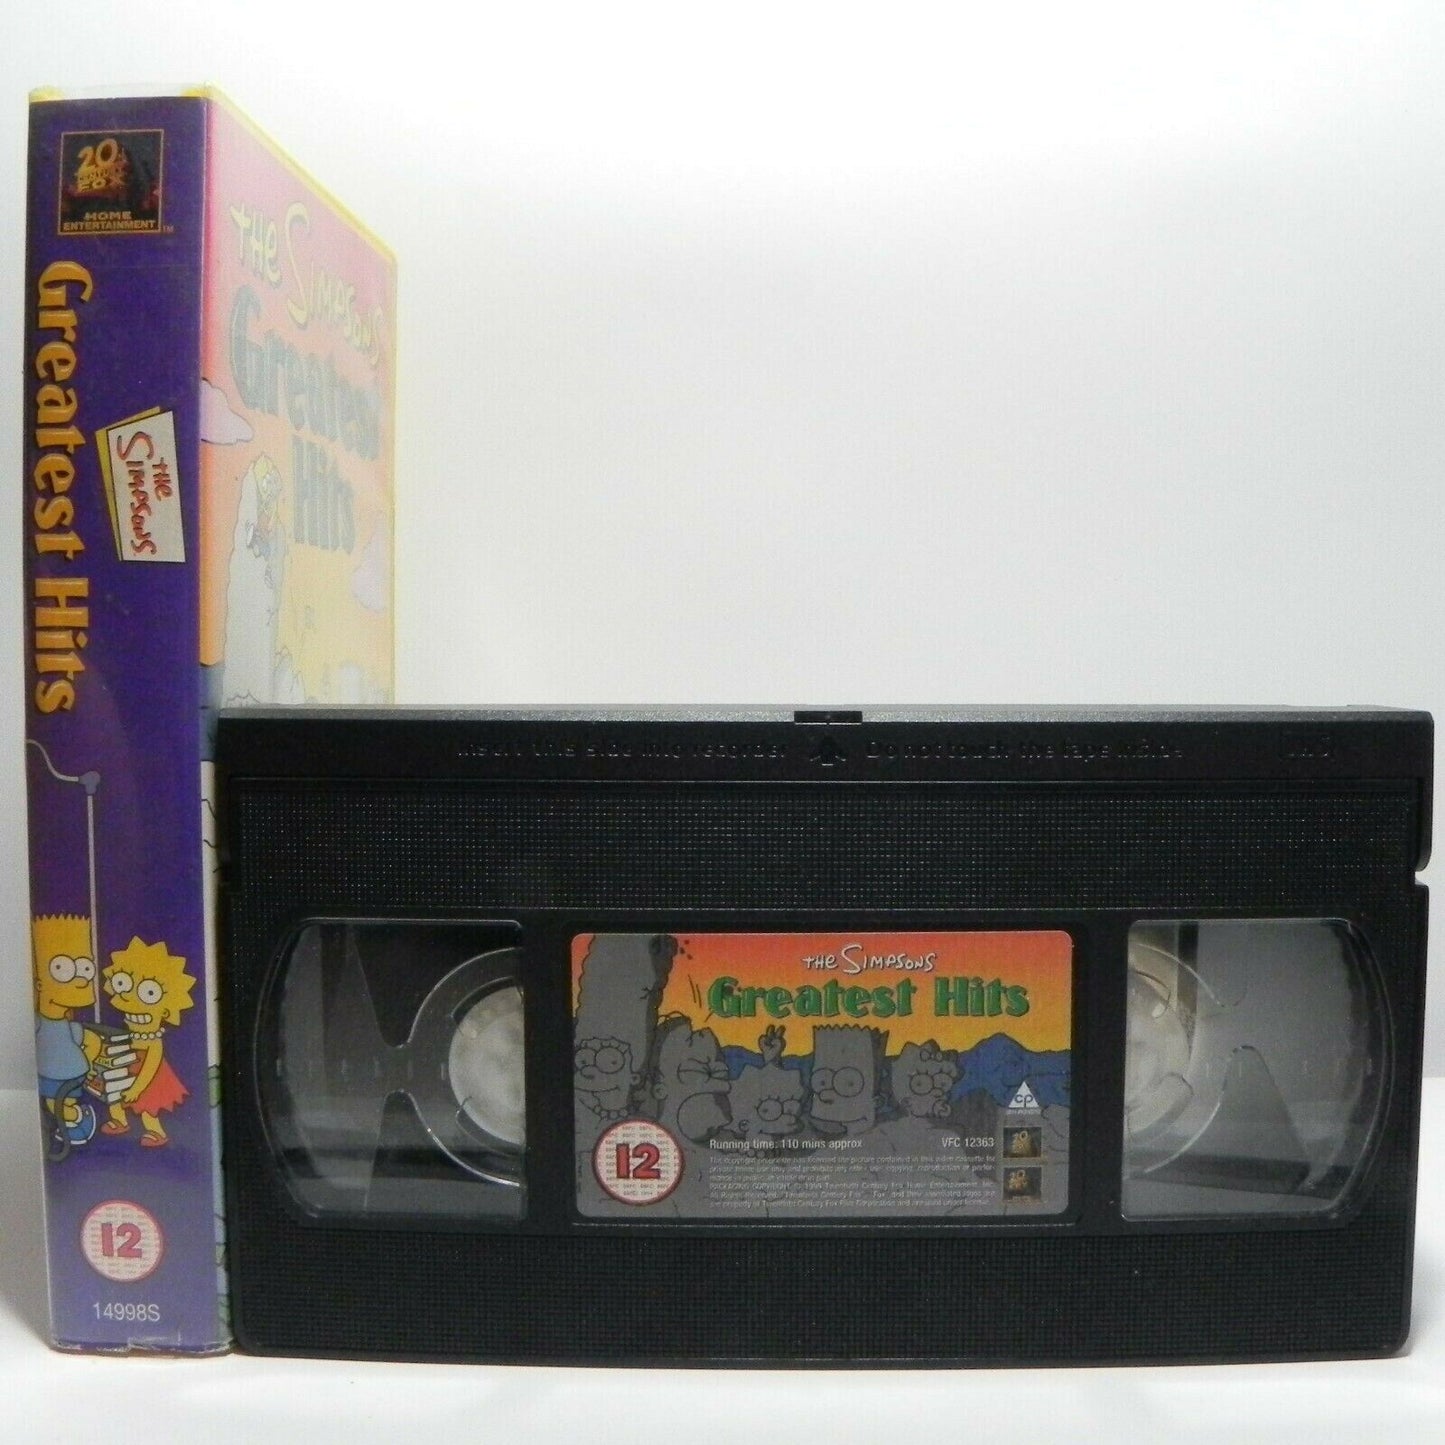 The Simpsons: Greatest Hits - 5 Classic Episodes - Animated - Children's - VHS-